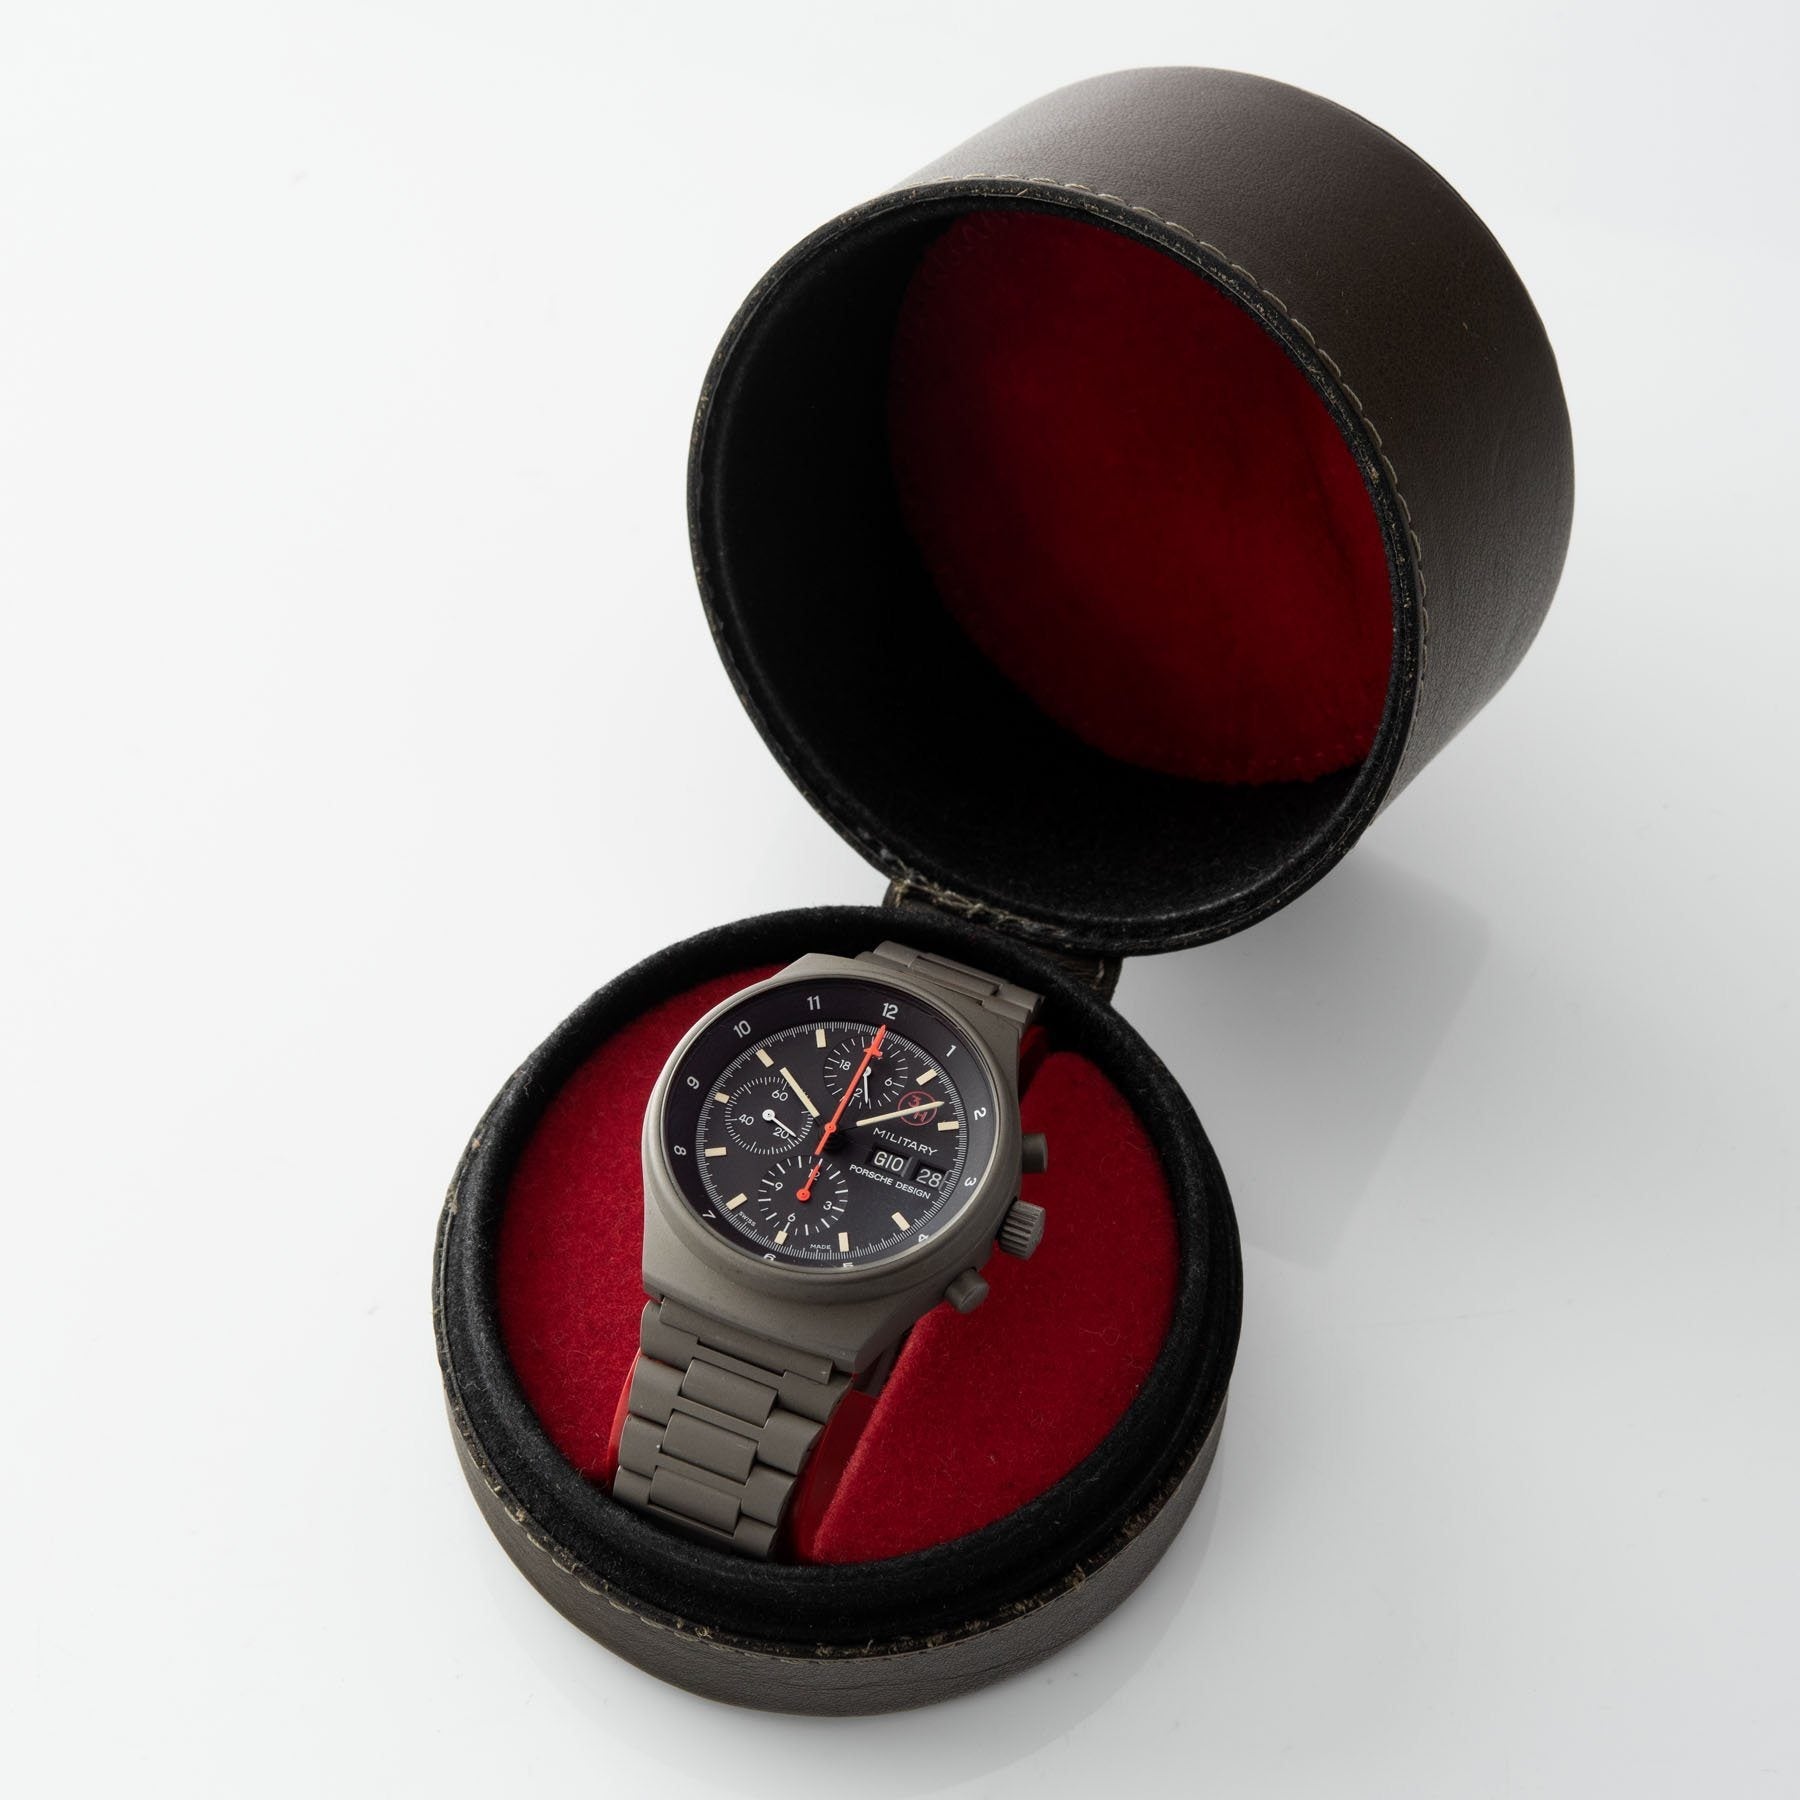 Porsche Design by Orfina 'Military' Chronograph 1 Reference 7177